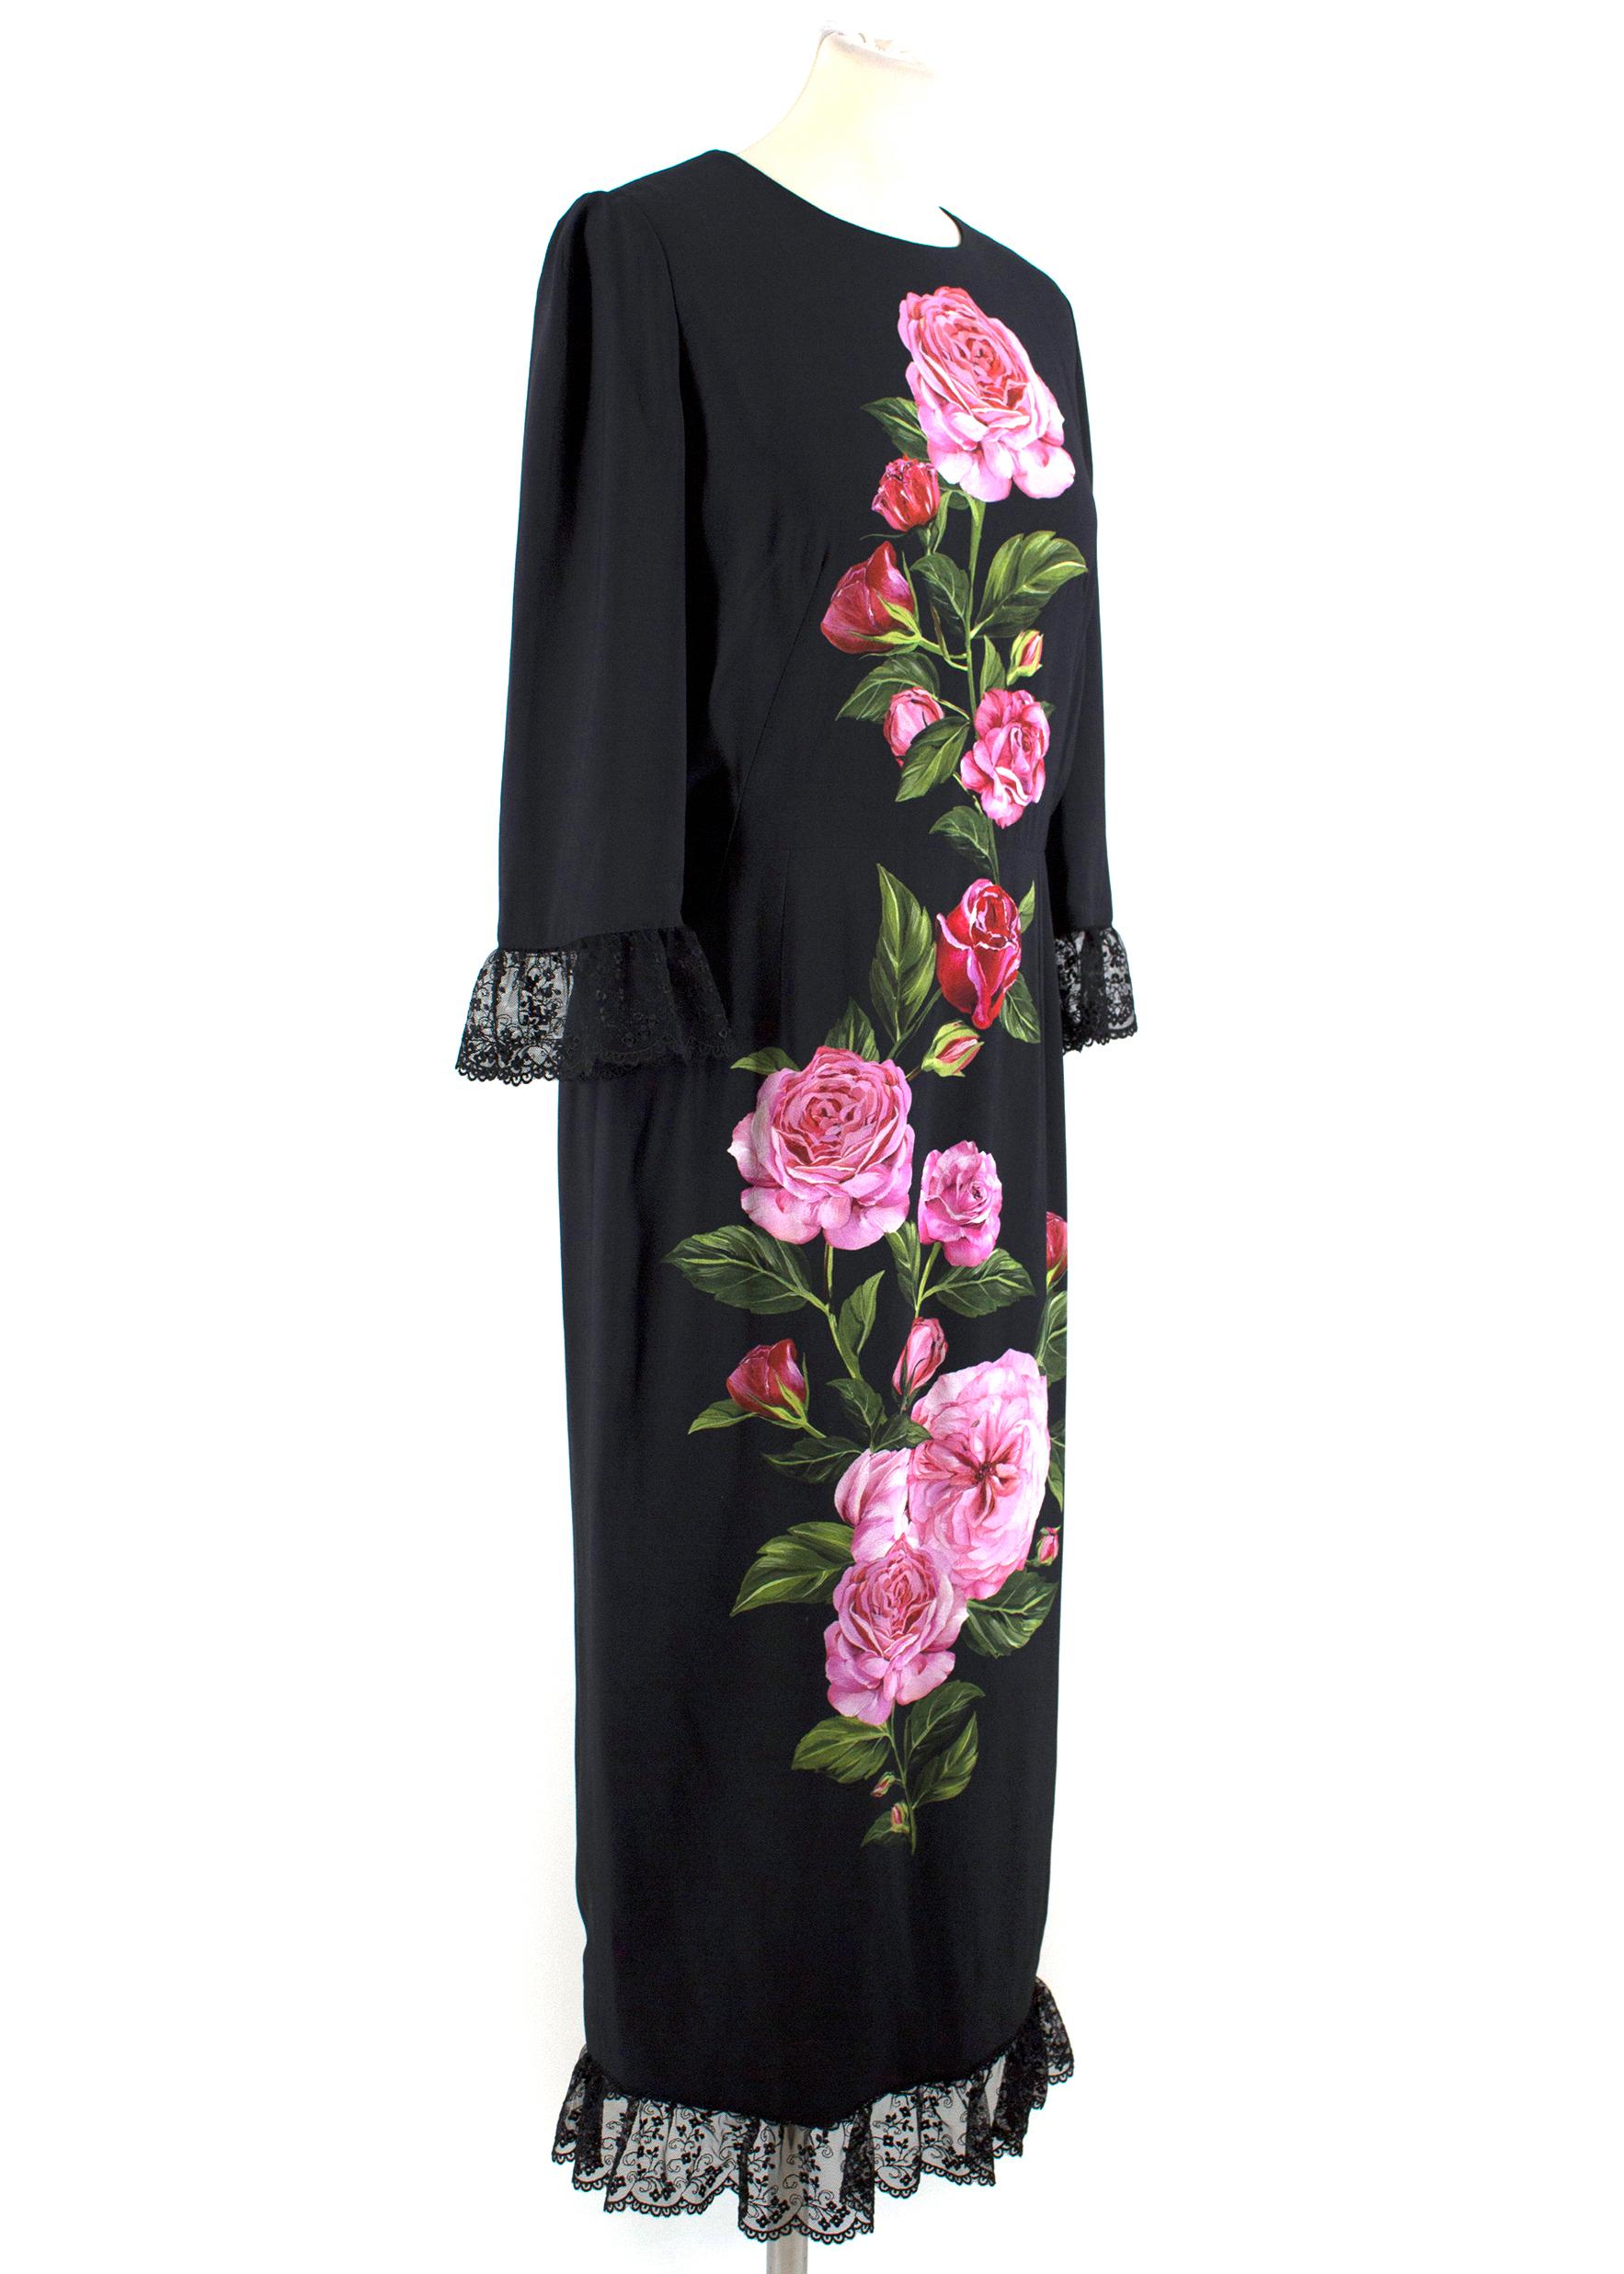 Dolce and Gabbana Rose Printed Lace Detail Midi Dress

- Beautiful rose print on the front of the dress
- Black lace detailing has been added to the cuffs and hem
- Cropped sleeves
- Midi length
- Round neckline
- Concealed rear zip
- 35cm split up